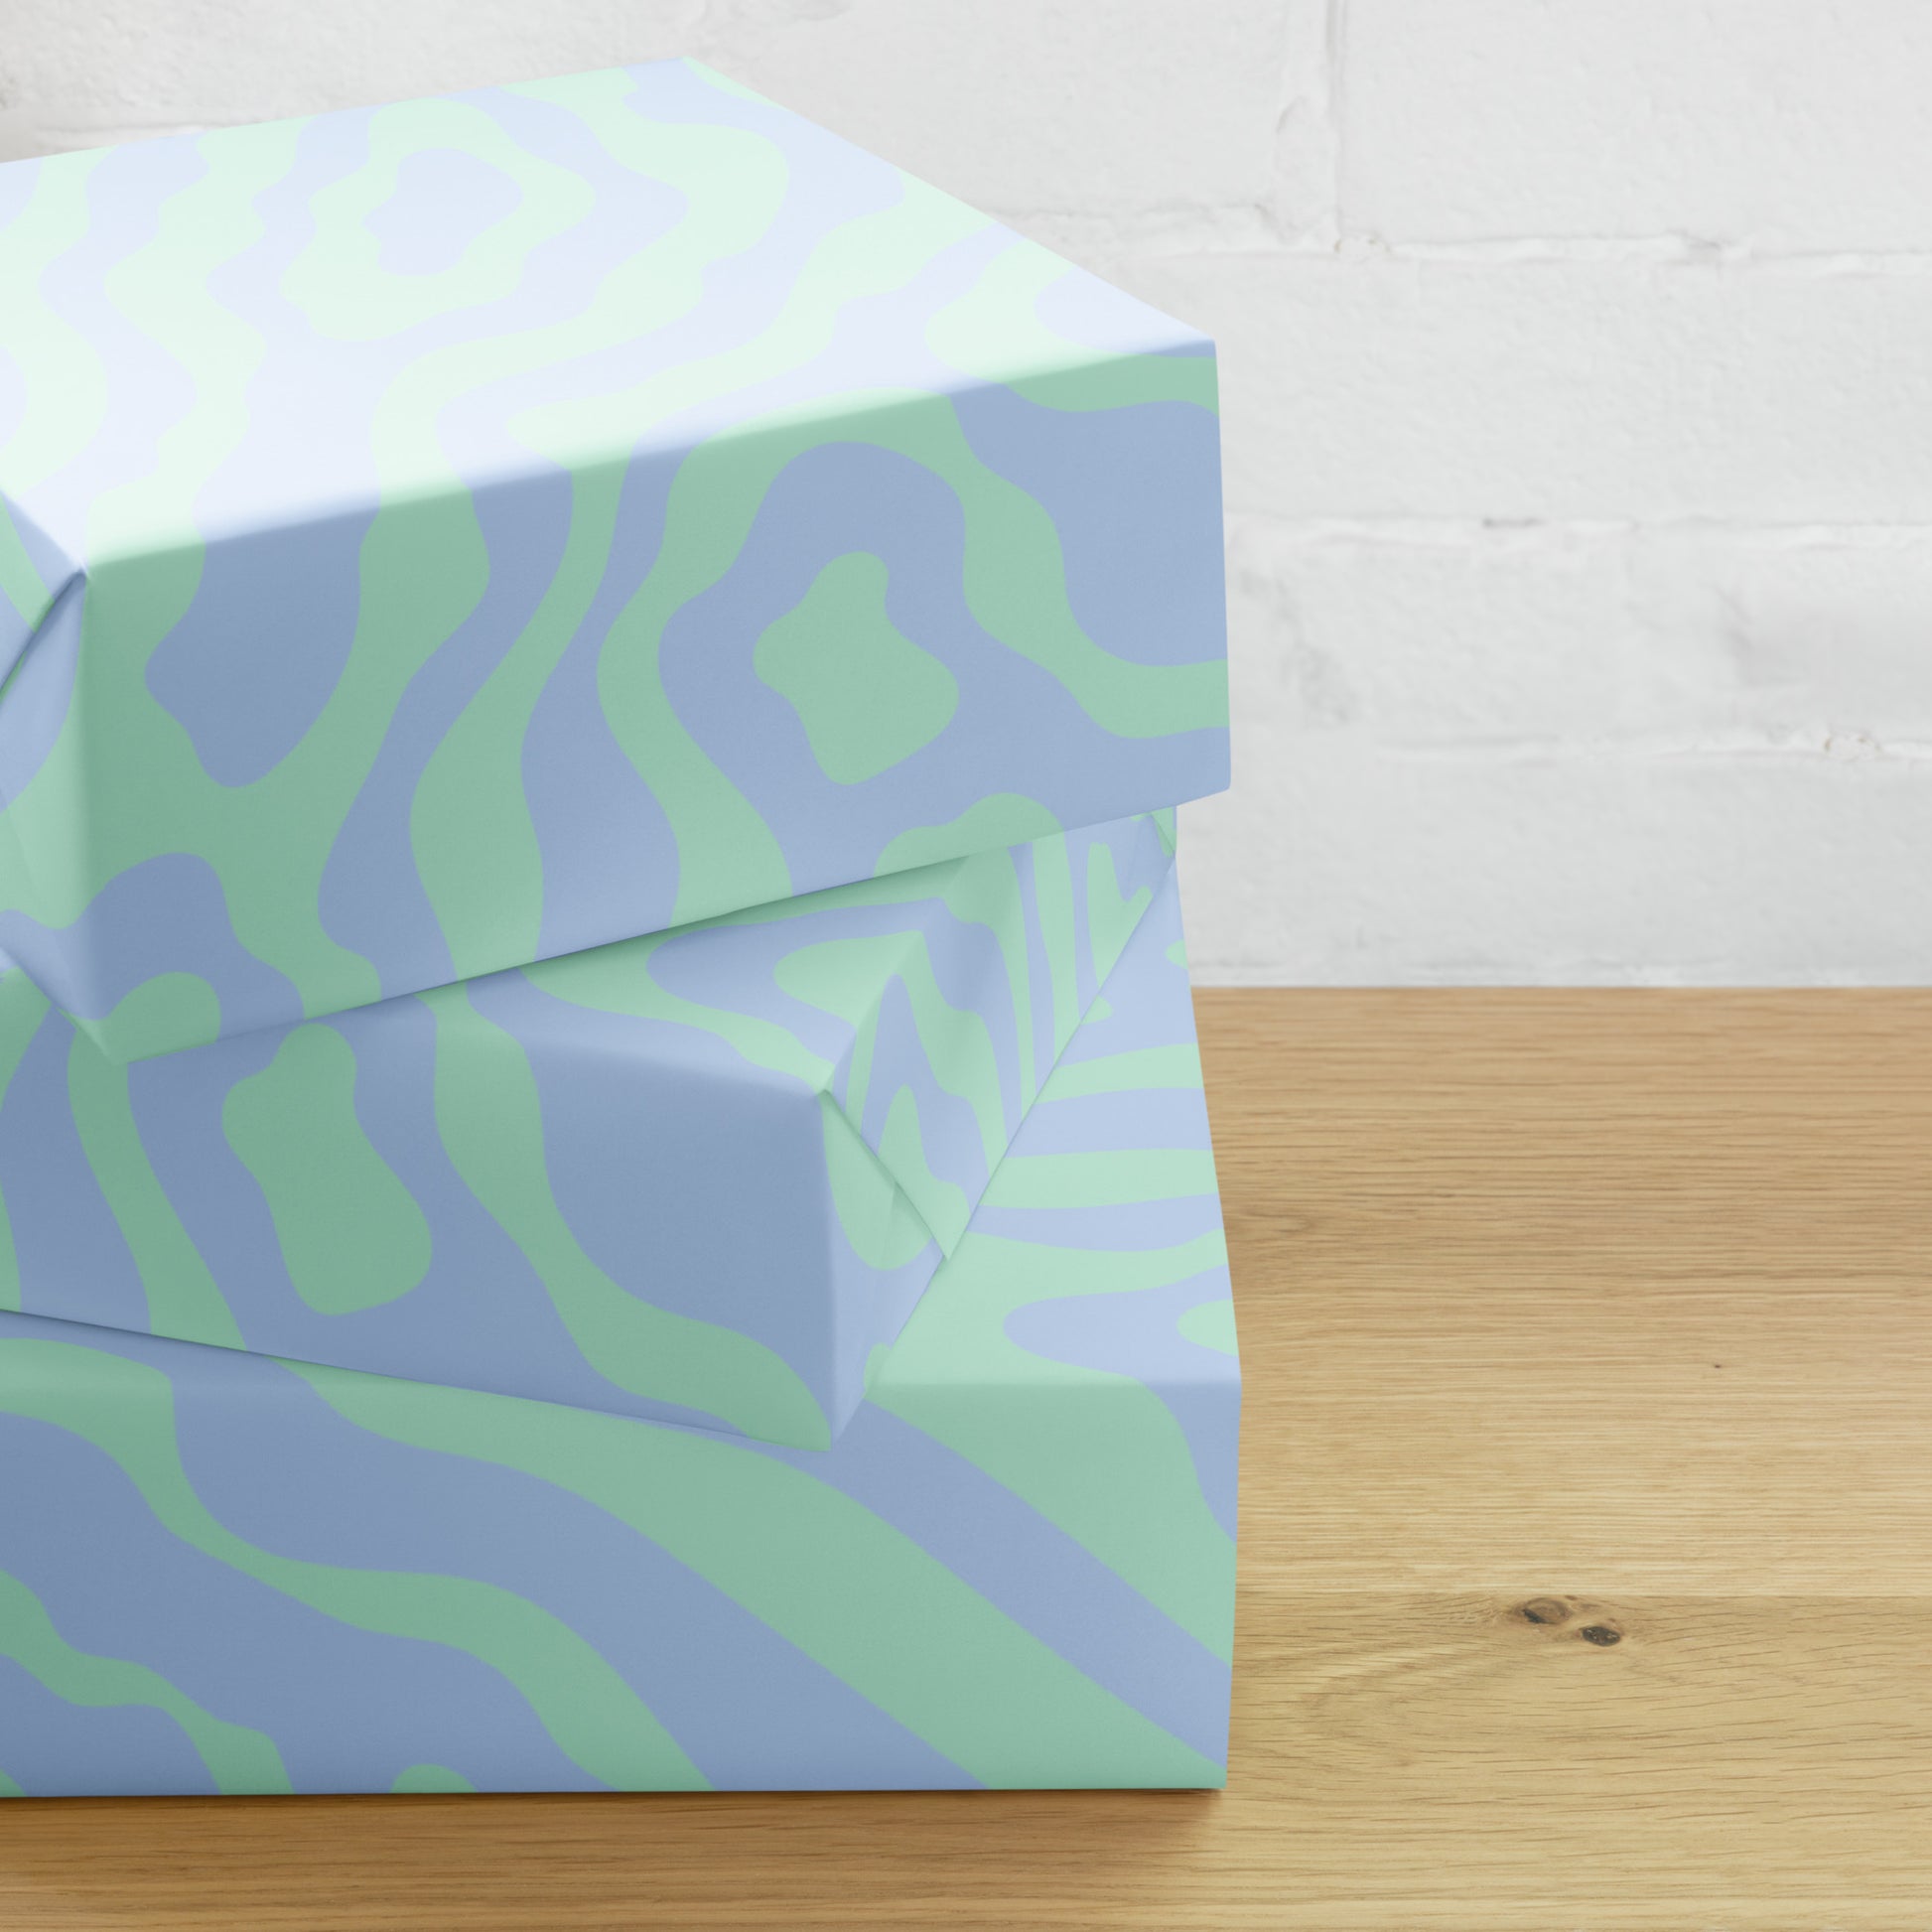 Wrapping paper with blue and green colors